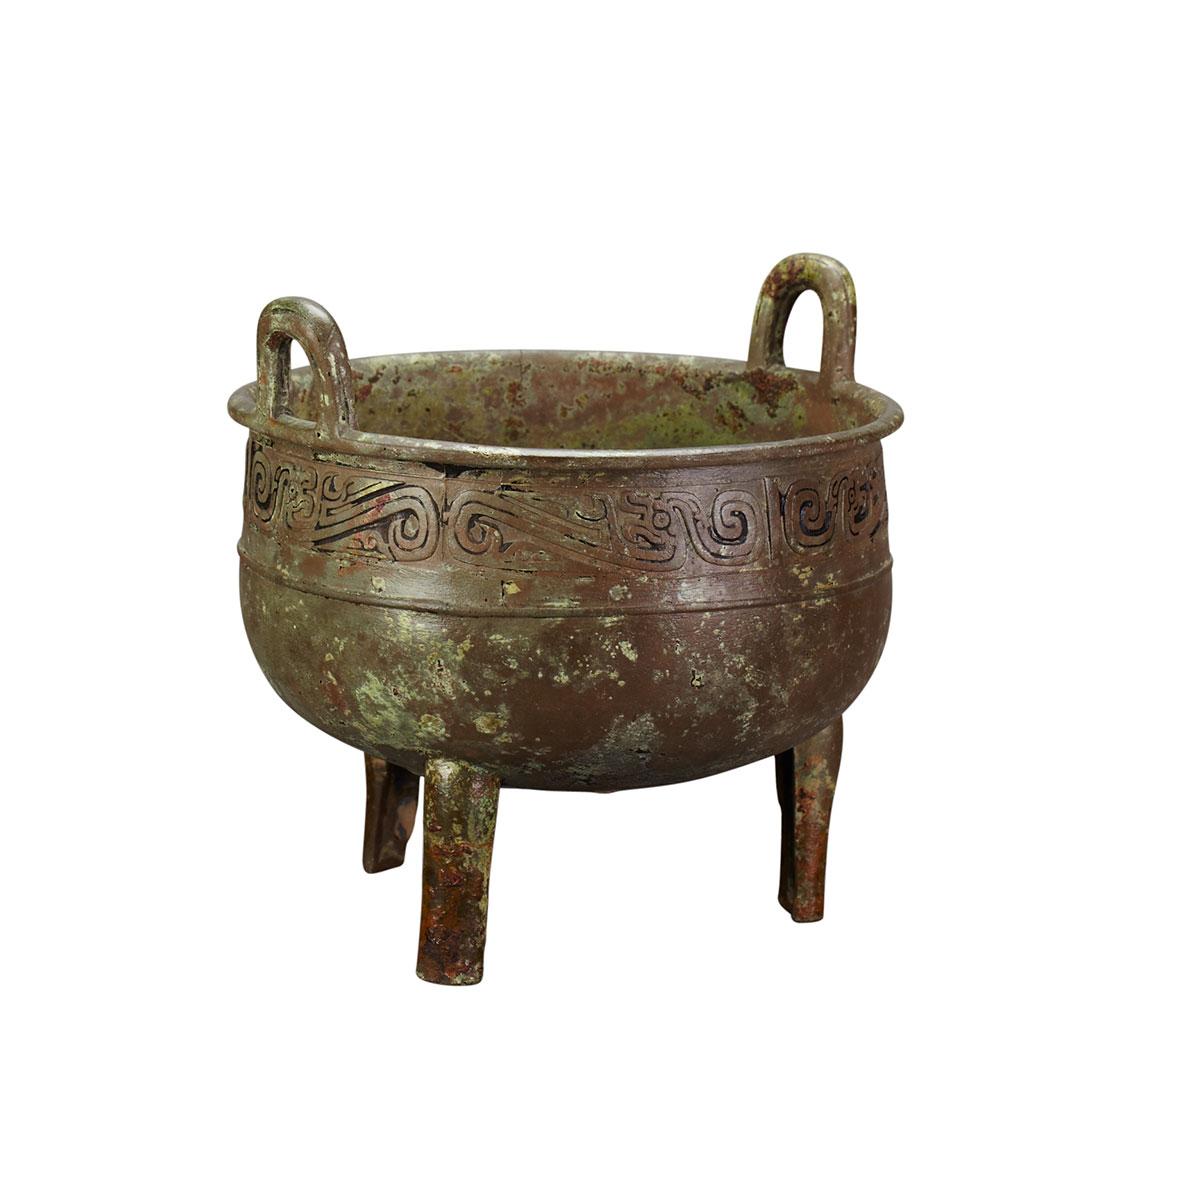 Well-Cast Bronze Ritual Food Vessel, Ding, Western Zhou Dynasty, 10th to 8th Century BC